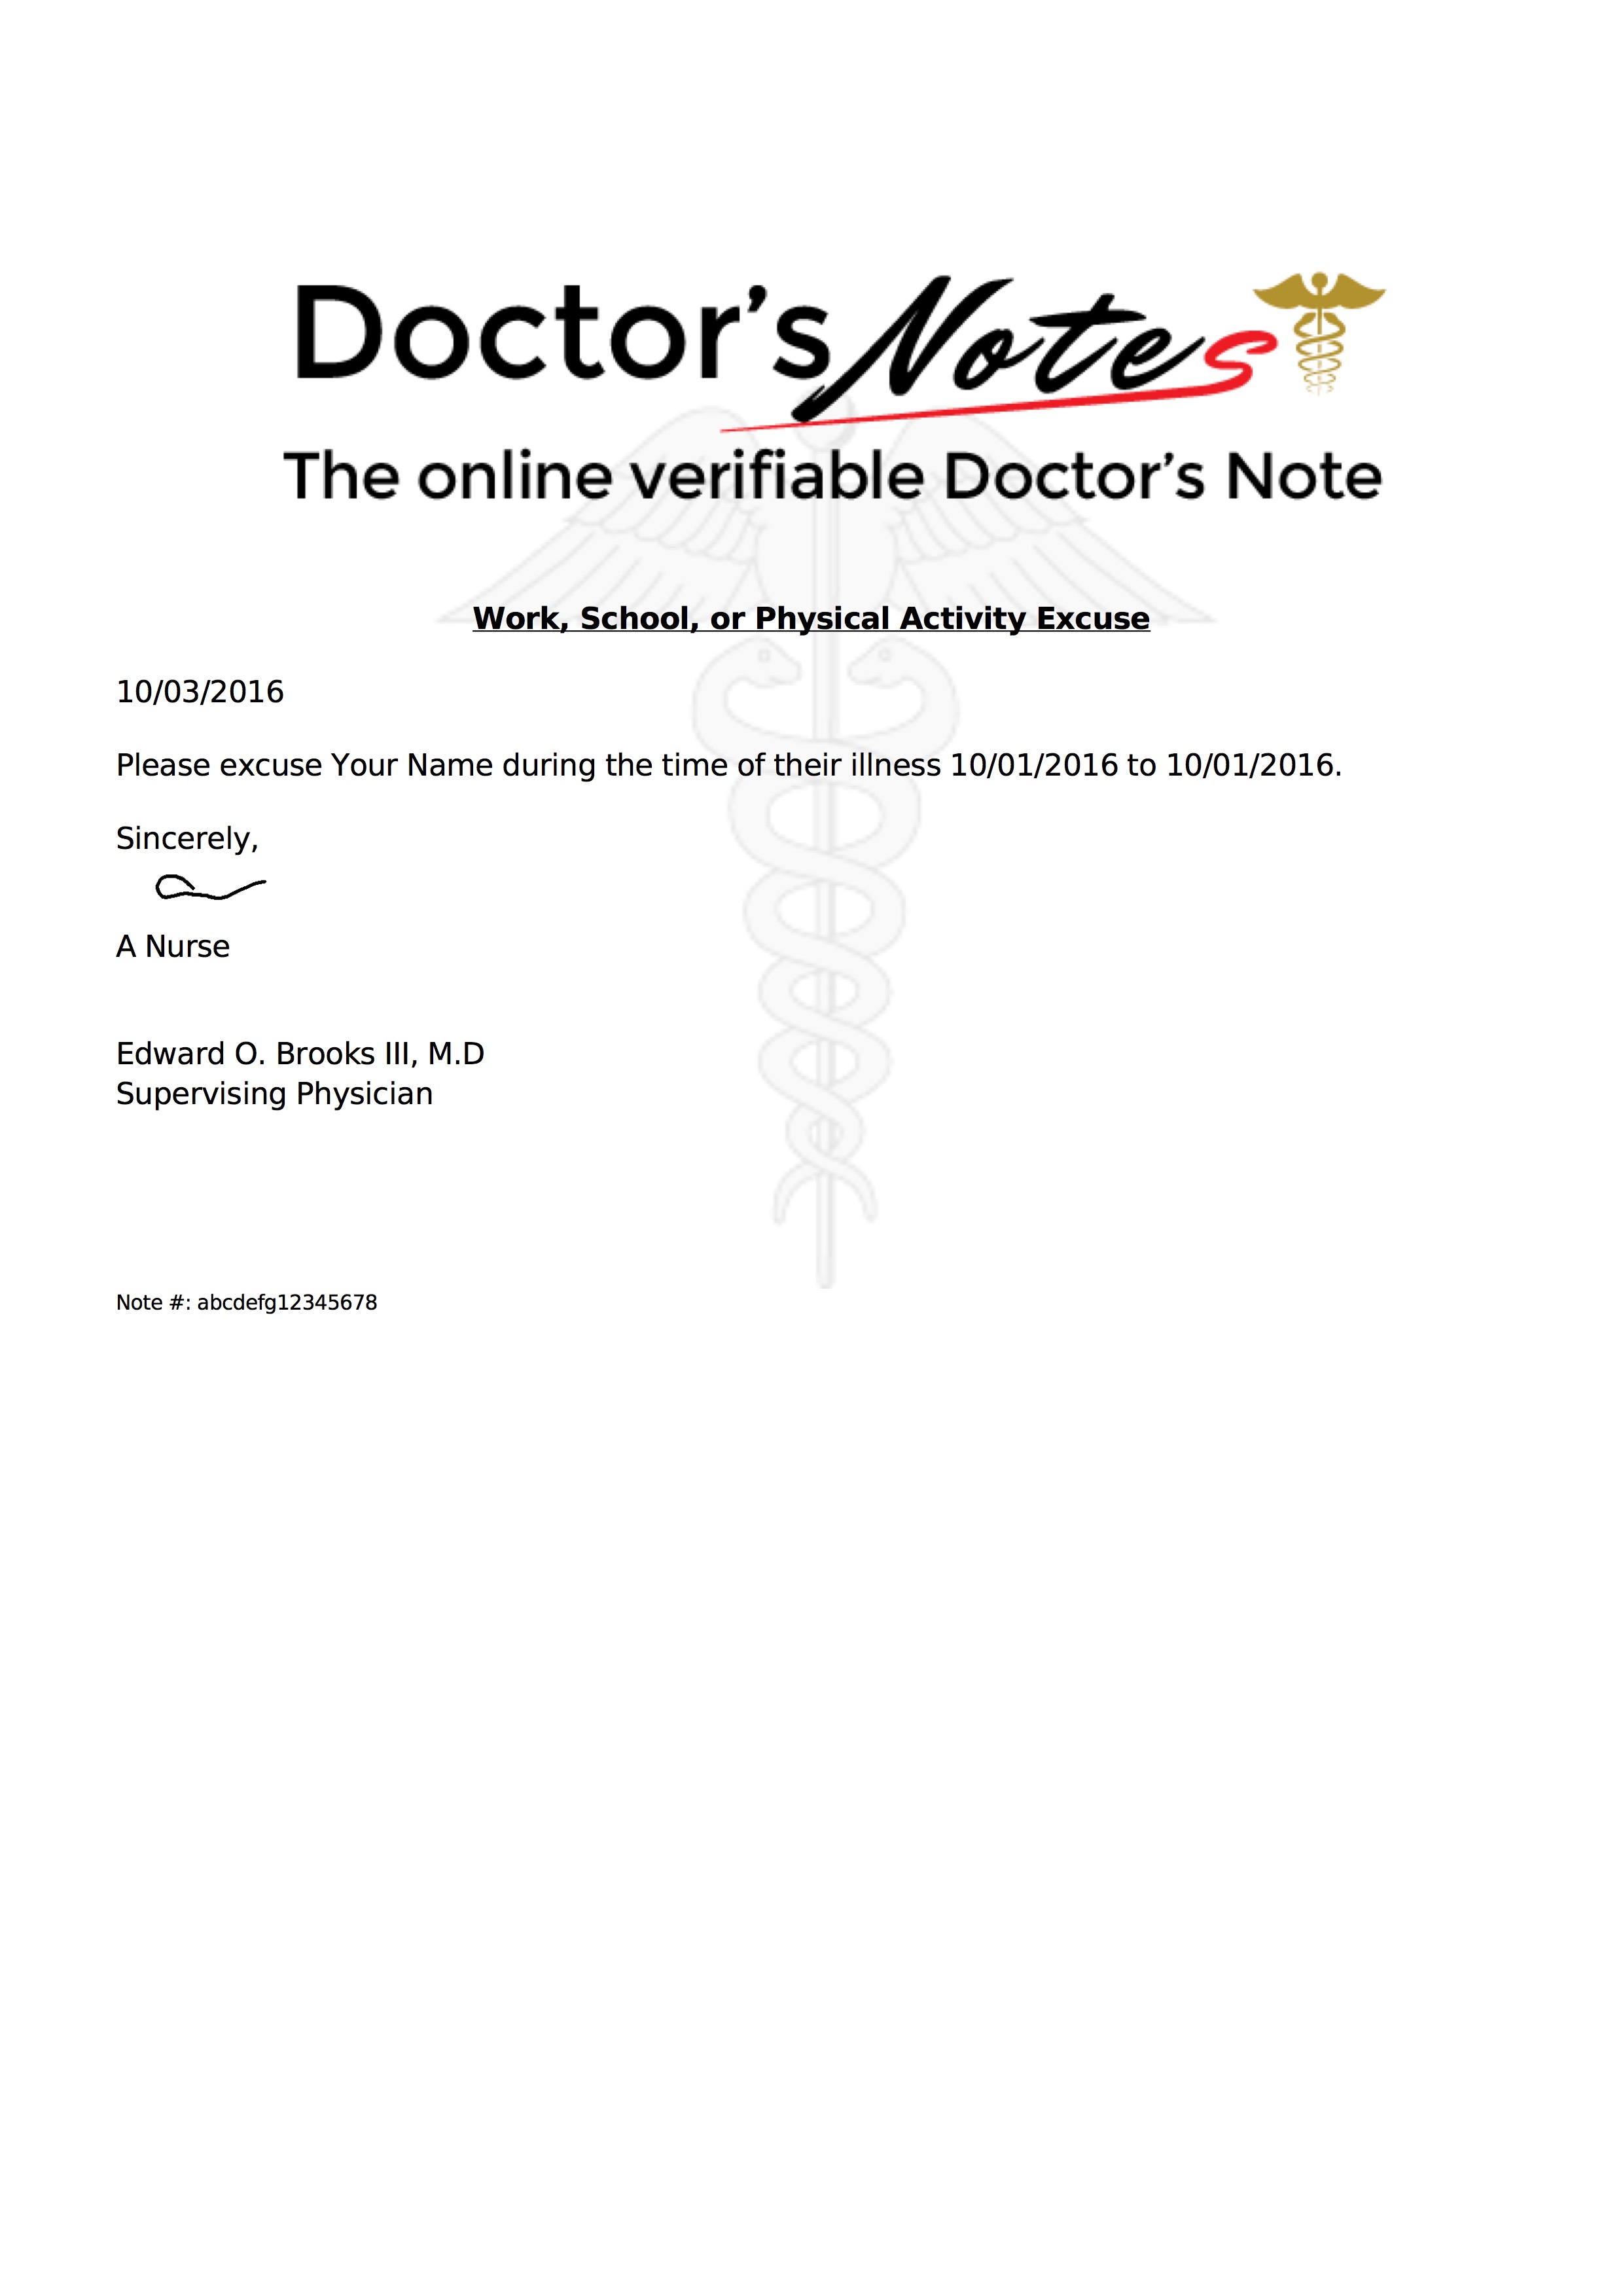 work-excuse-letter-from-doctor-for-your-needs-letter-template-collection